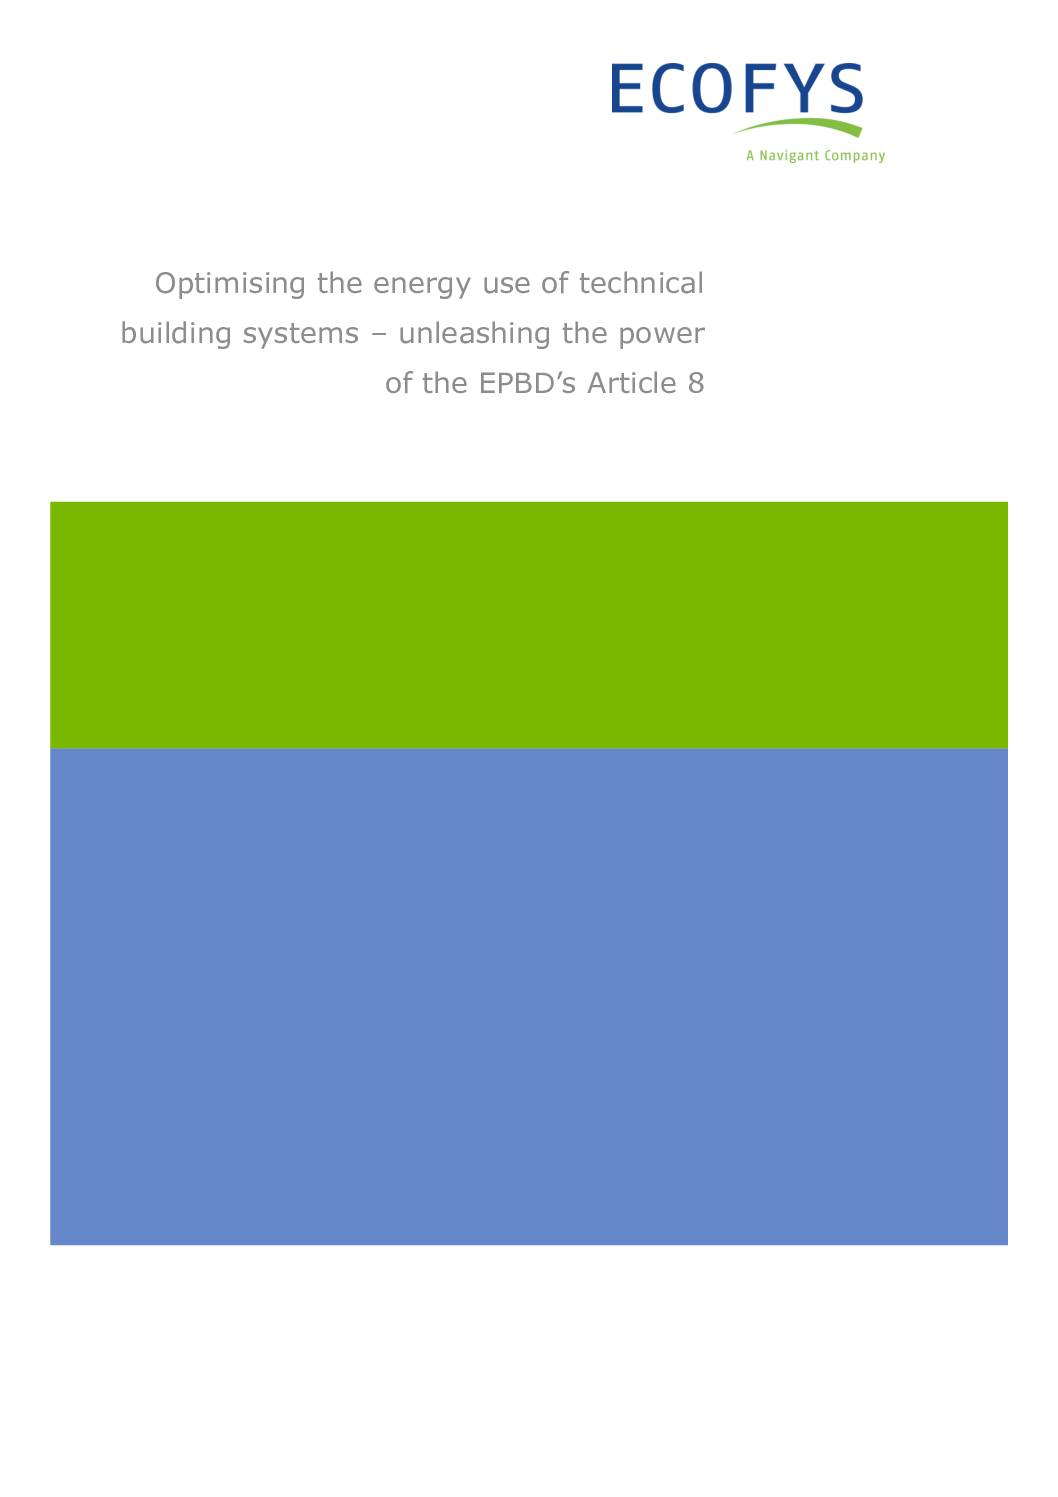 Optimising the energy use of technical building systems – unleashing the power of the EPBD’s Article 8